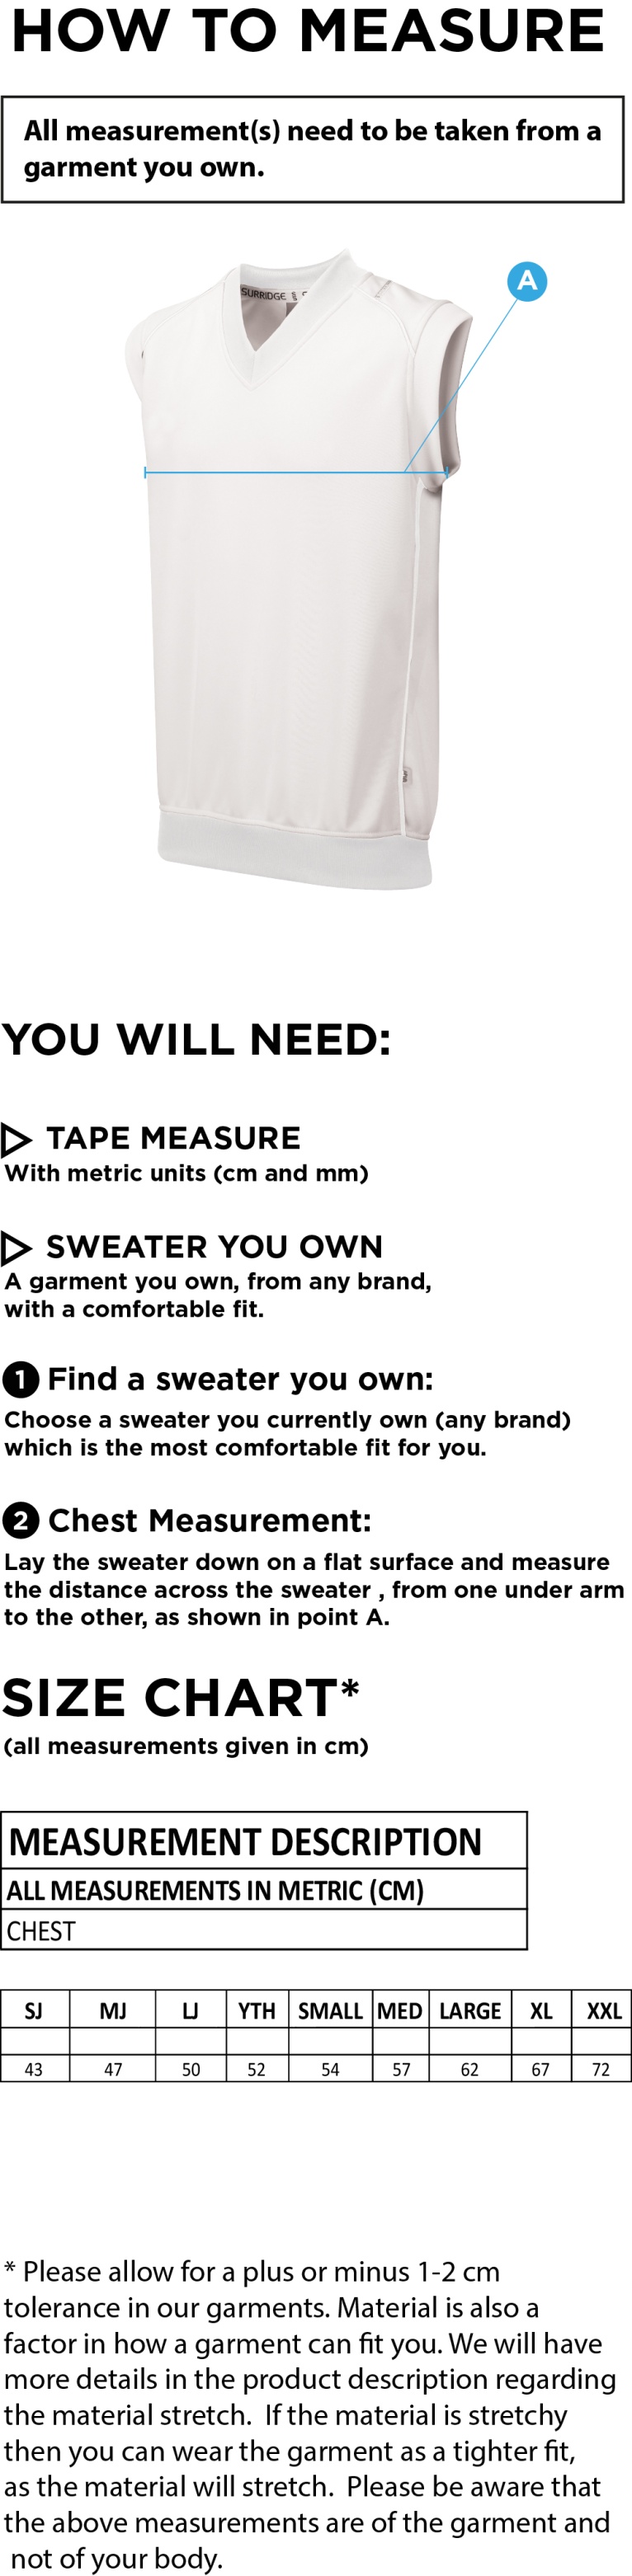 Dual Sleeveless Sweater - Size Guide